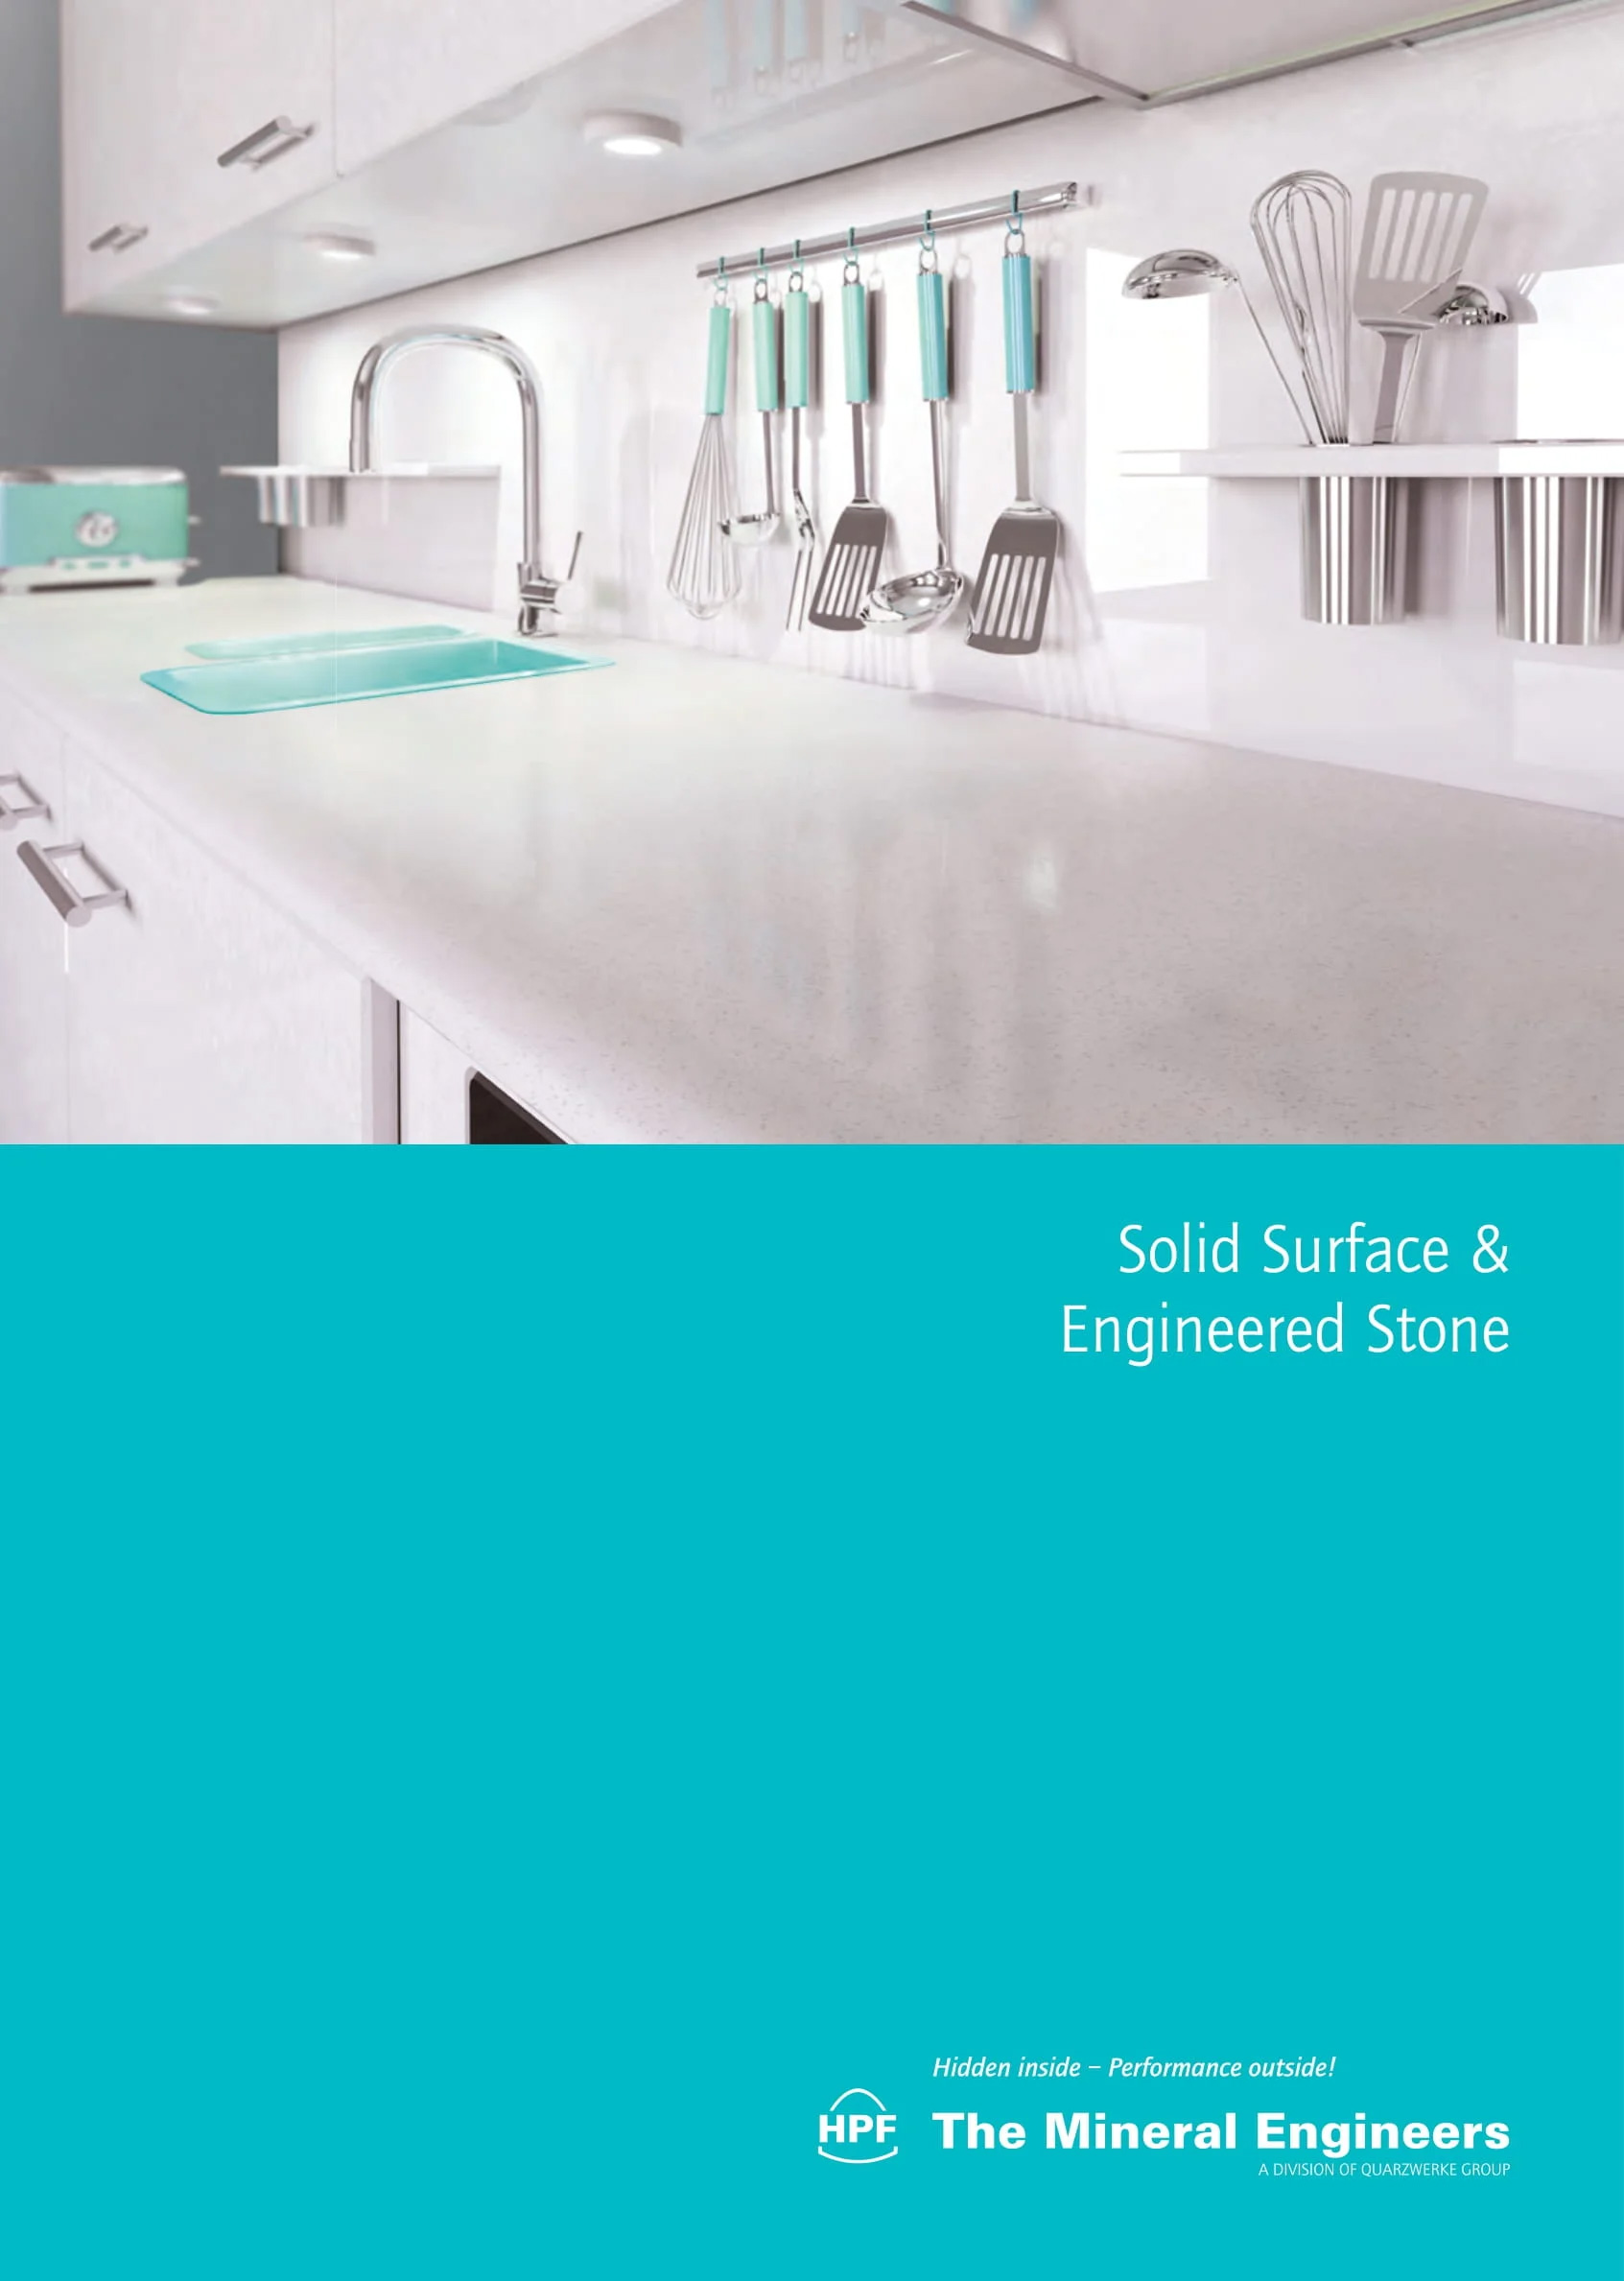 Solid Surface & Engineered Stone